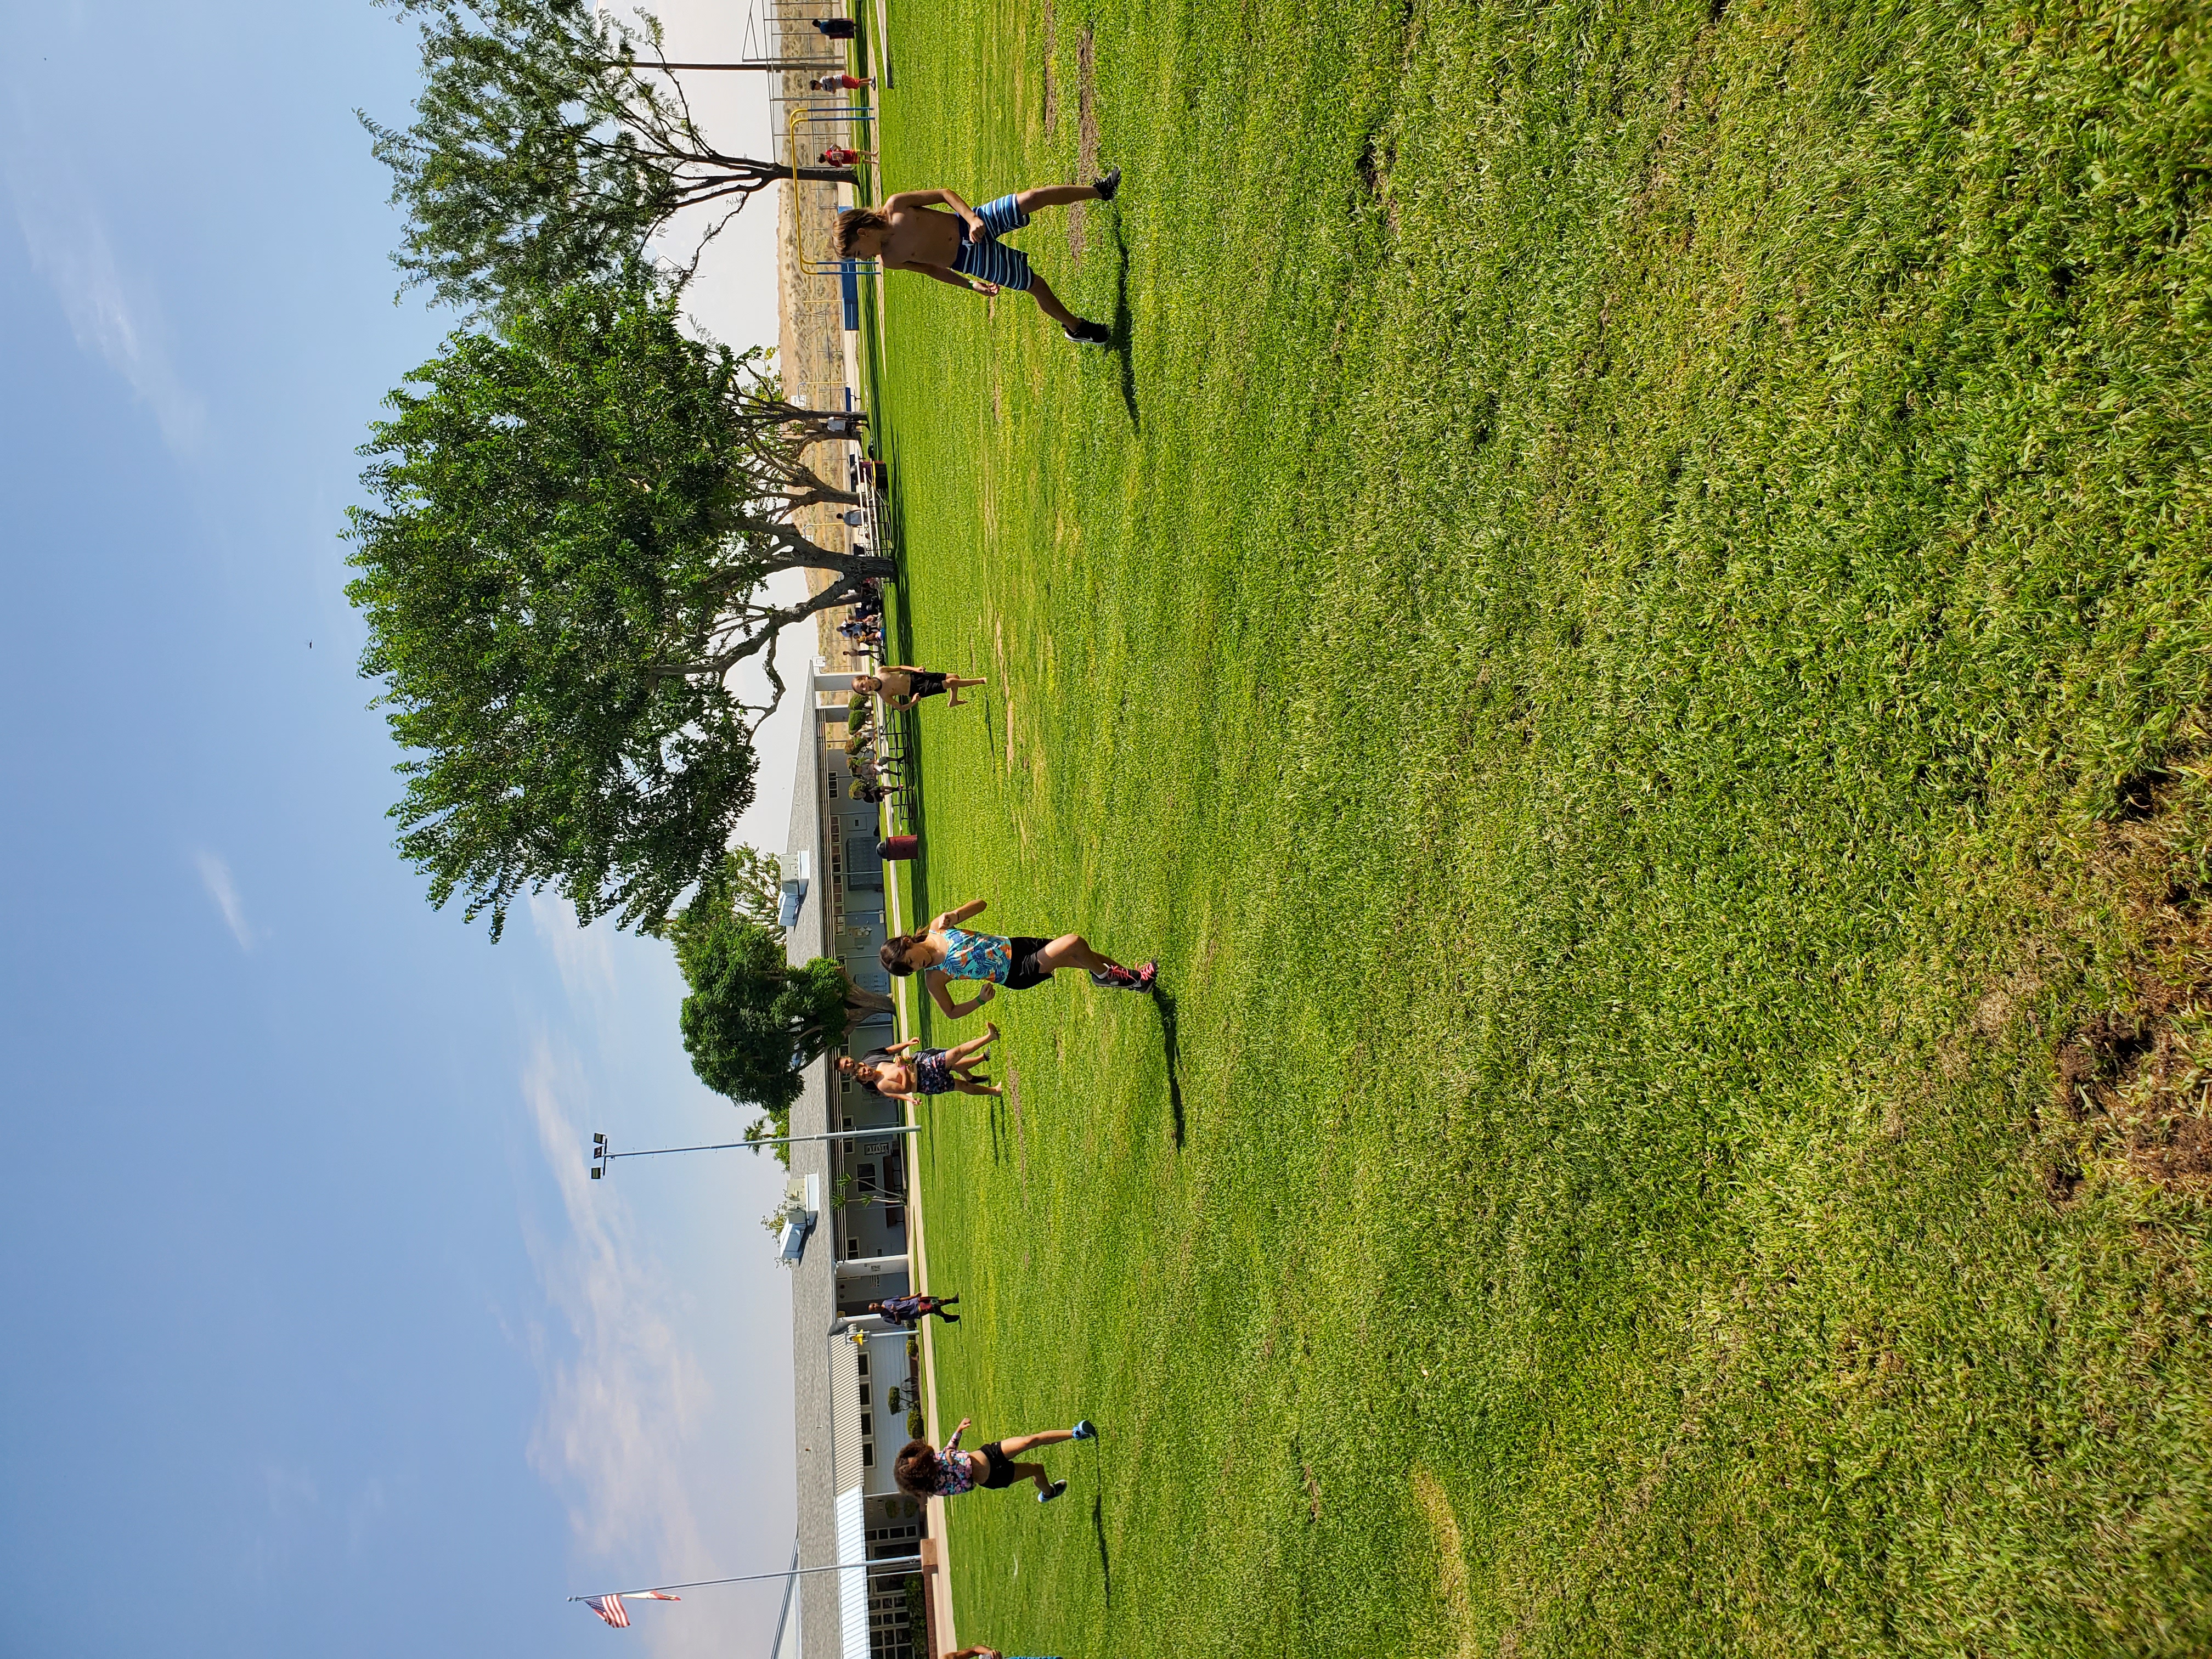 Students competing in a running event on grass field